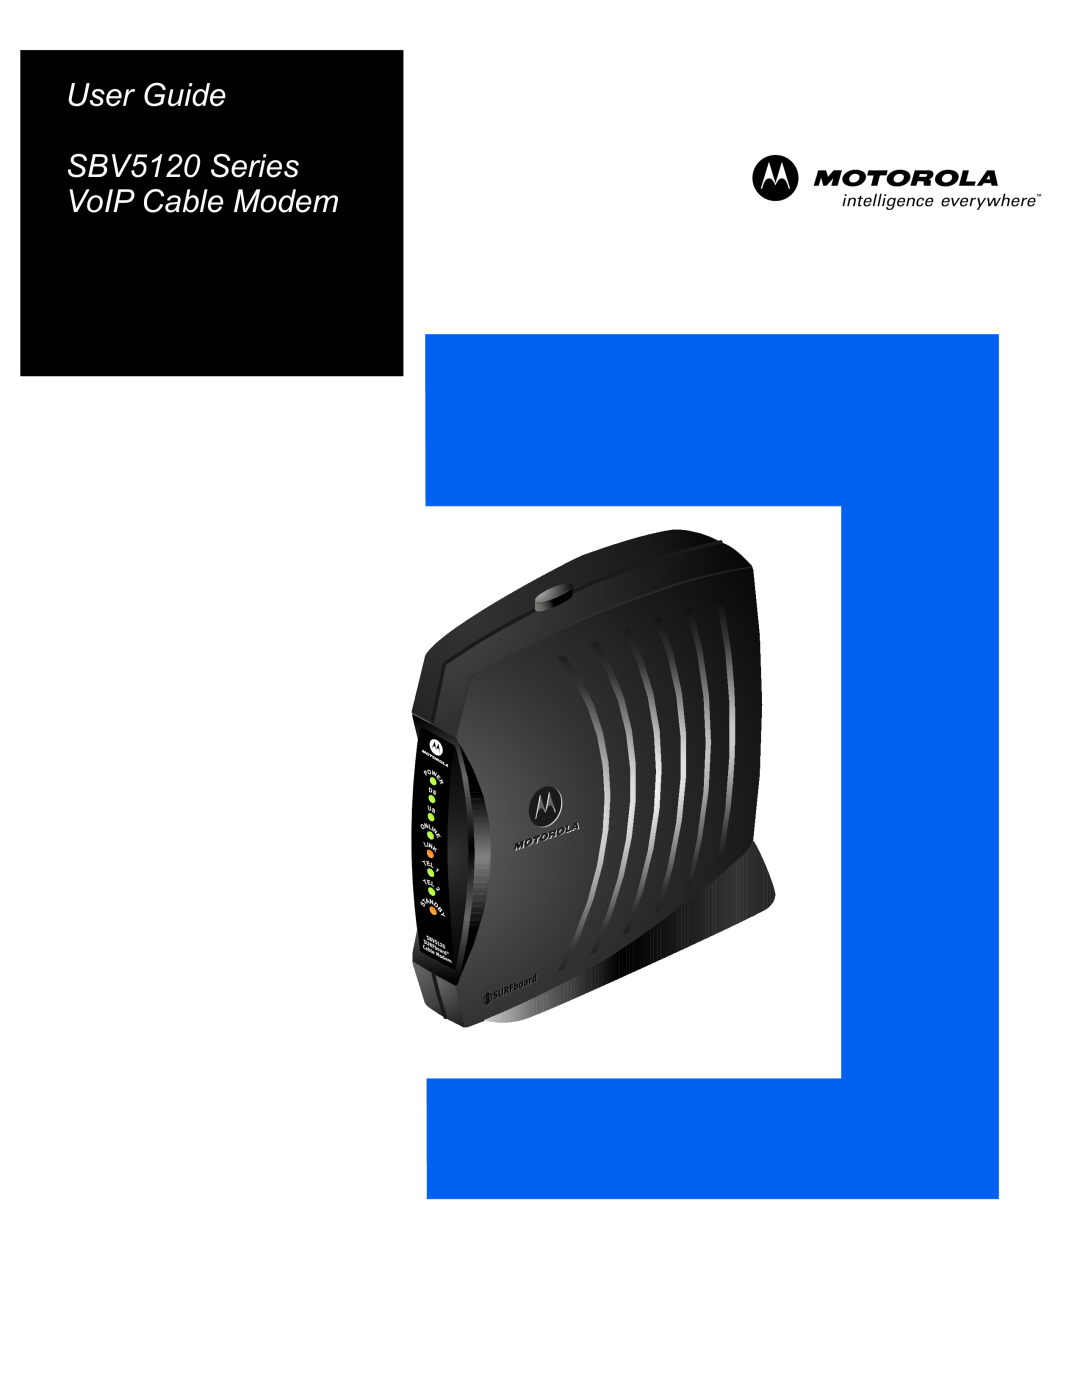 Motorola manual User Guide SBV5120 Series VoIP Cable Modem 